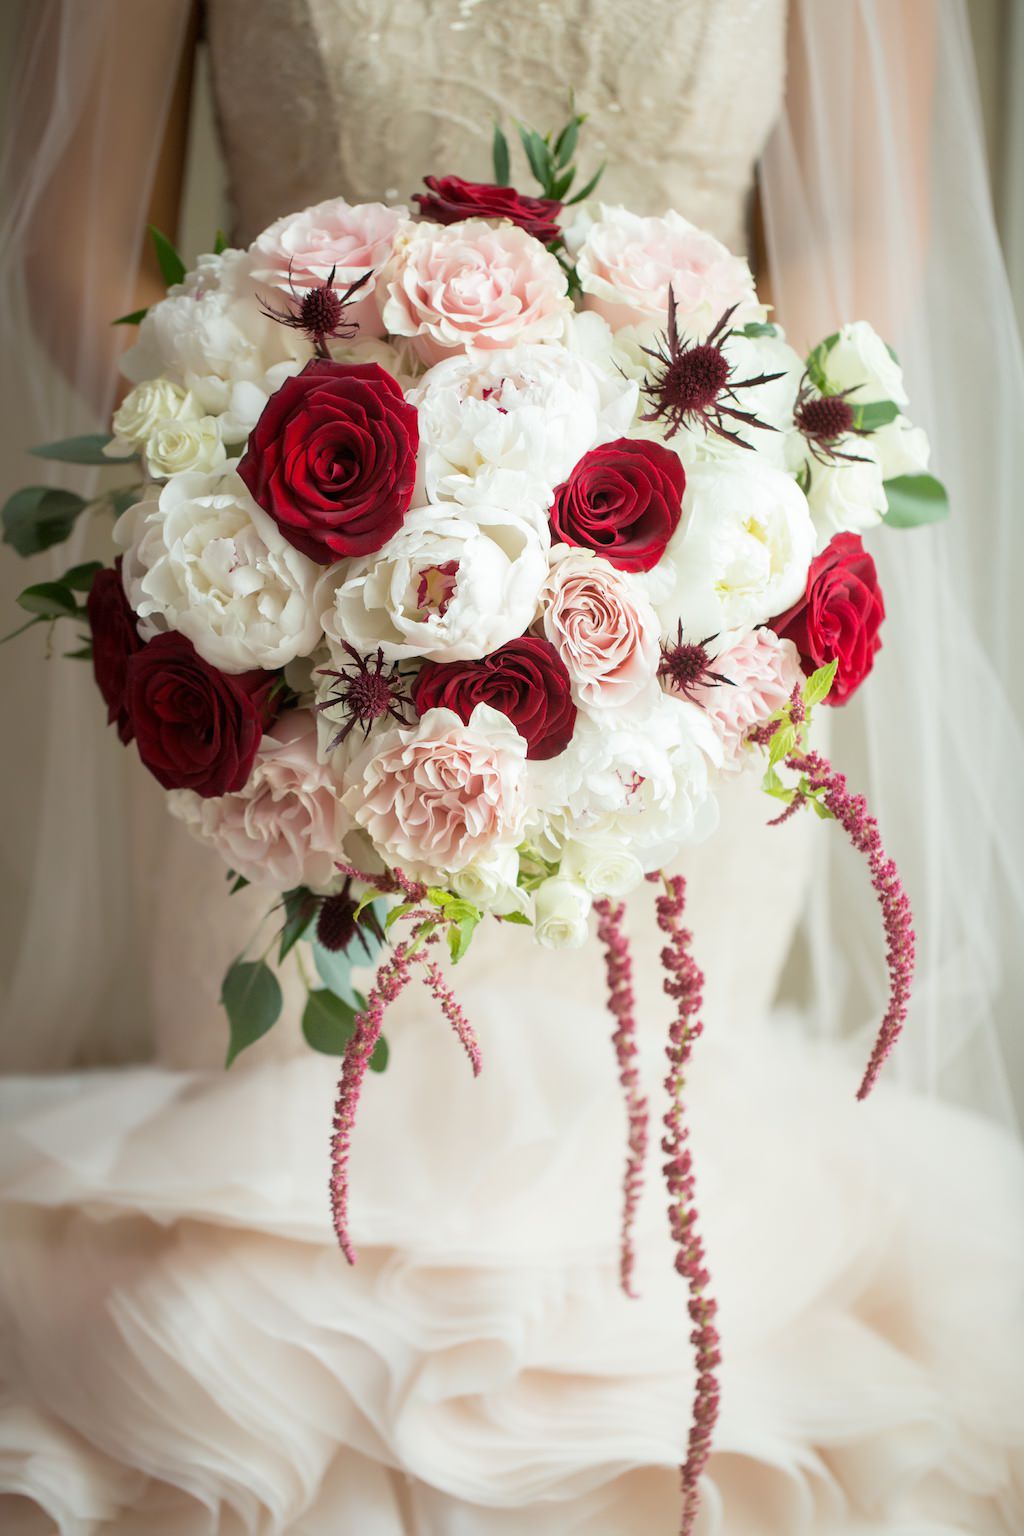 Bridal Portrait with Red Rose, Blush Pink Carnation and Greenery and Burgundy Thistle Bouquet | Tampa Bay Wedding Photography Andi Diamond Photography